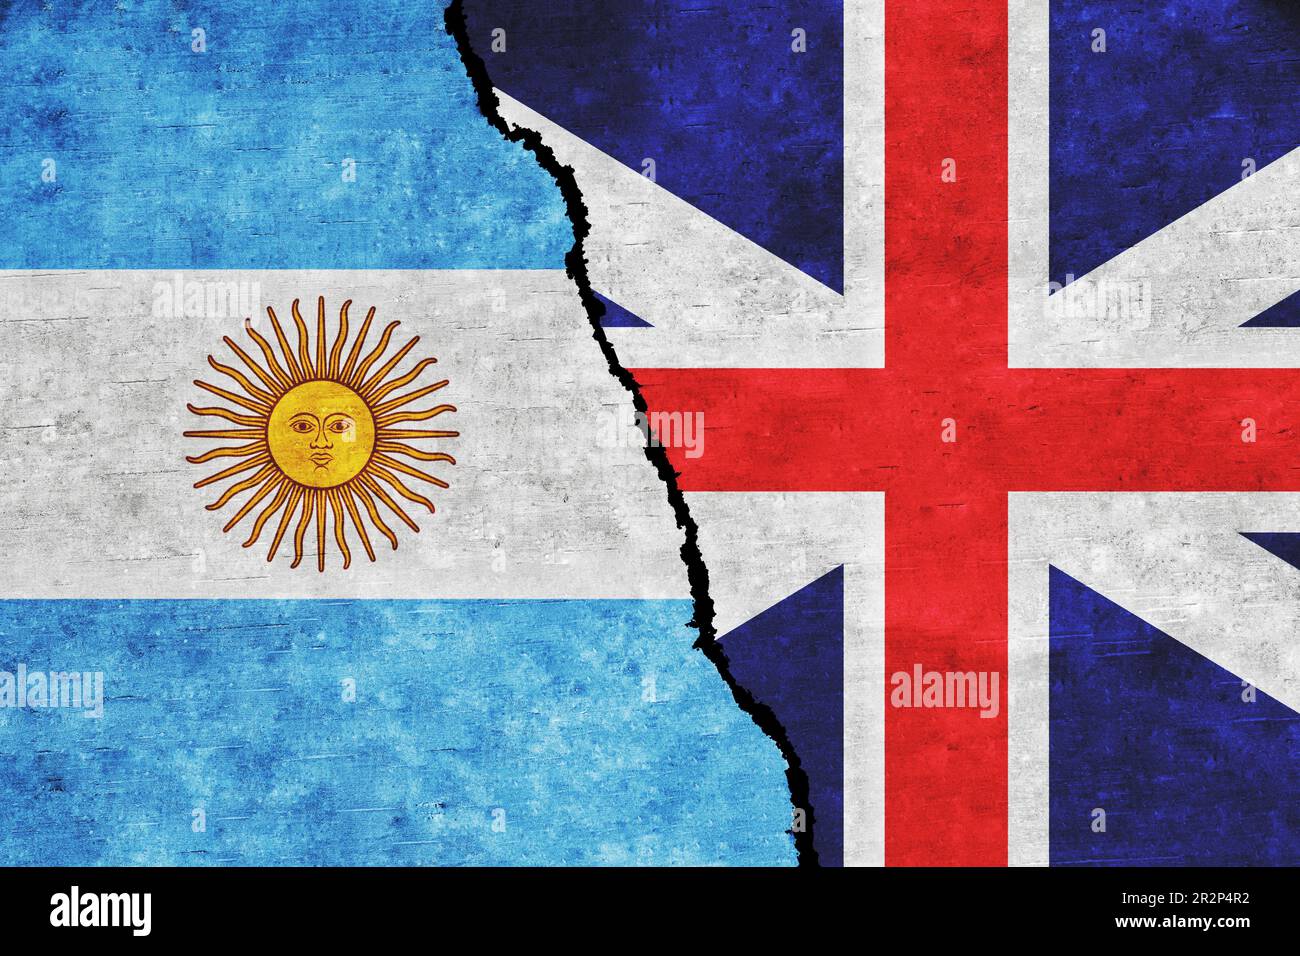 Britain and Argentina flags together. Argentina Britain relations. Concept of conflict between Britain and Argentina Stock Photo